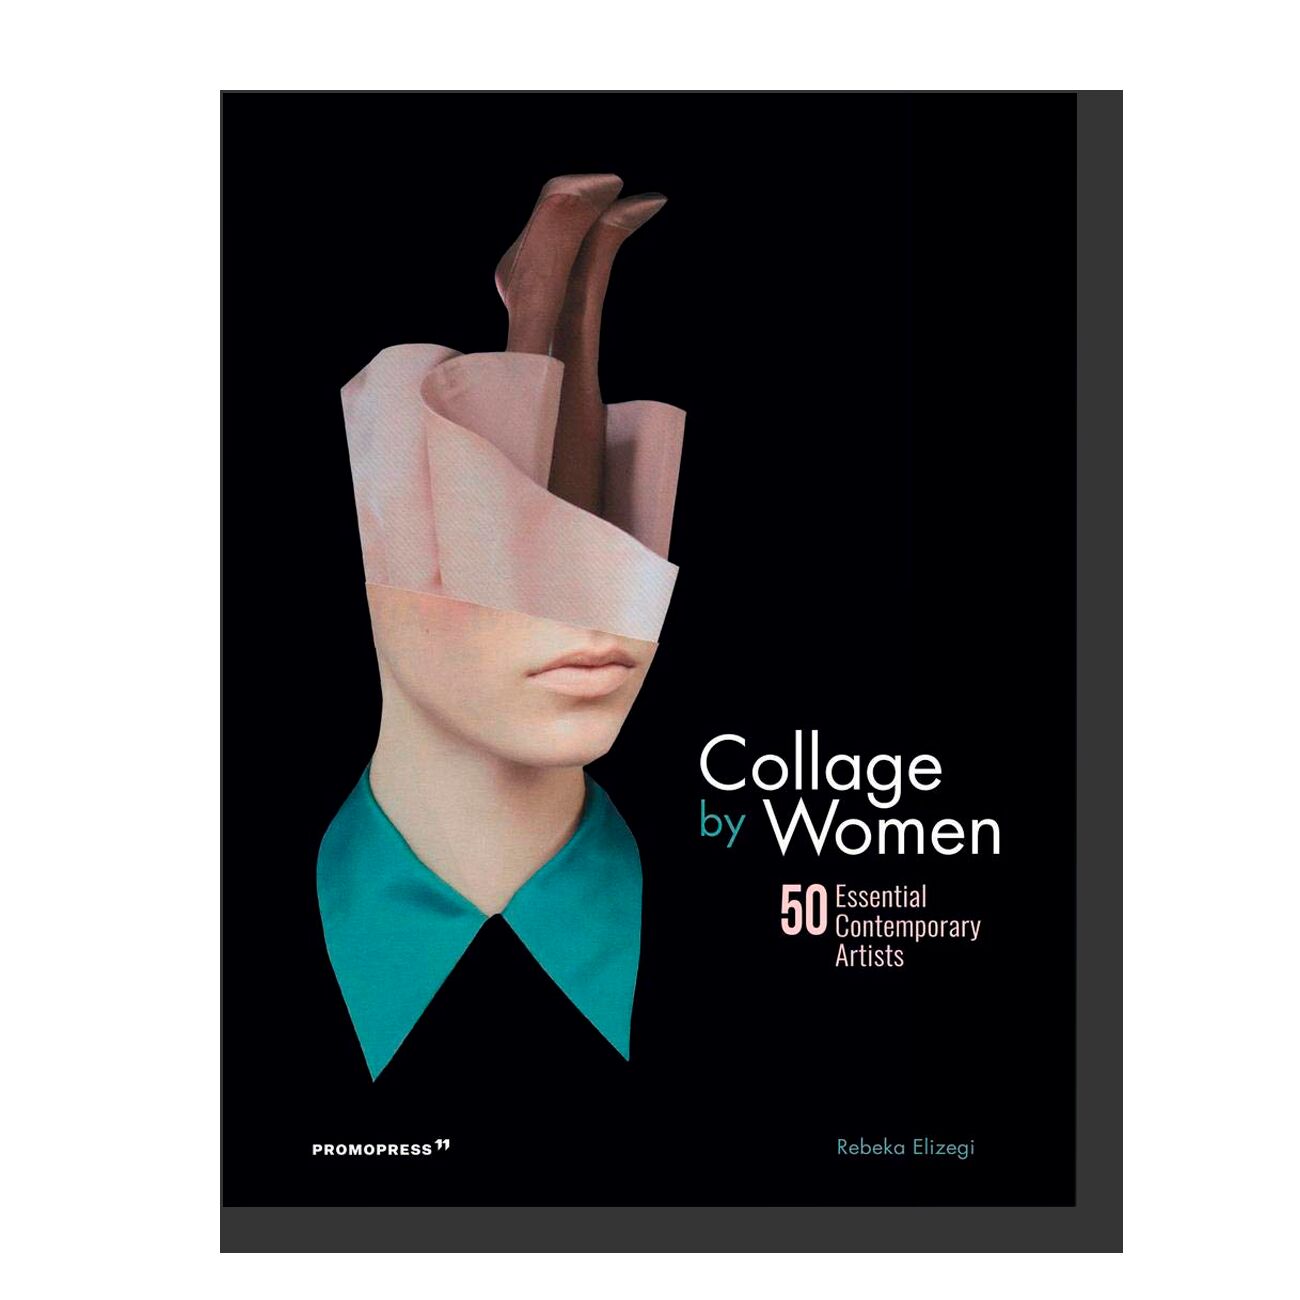 Collage by Women: 50 Essential Contemporary Artists